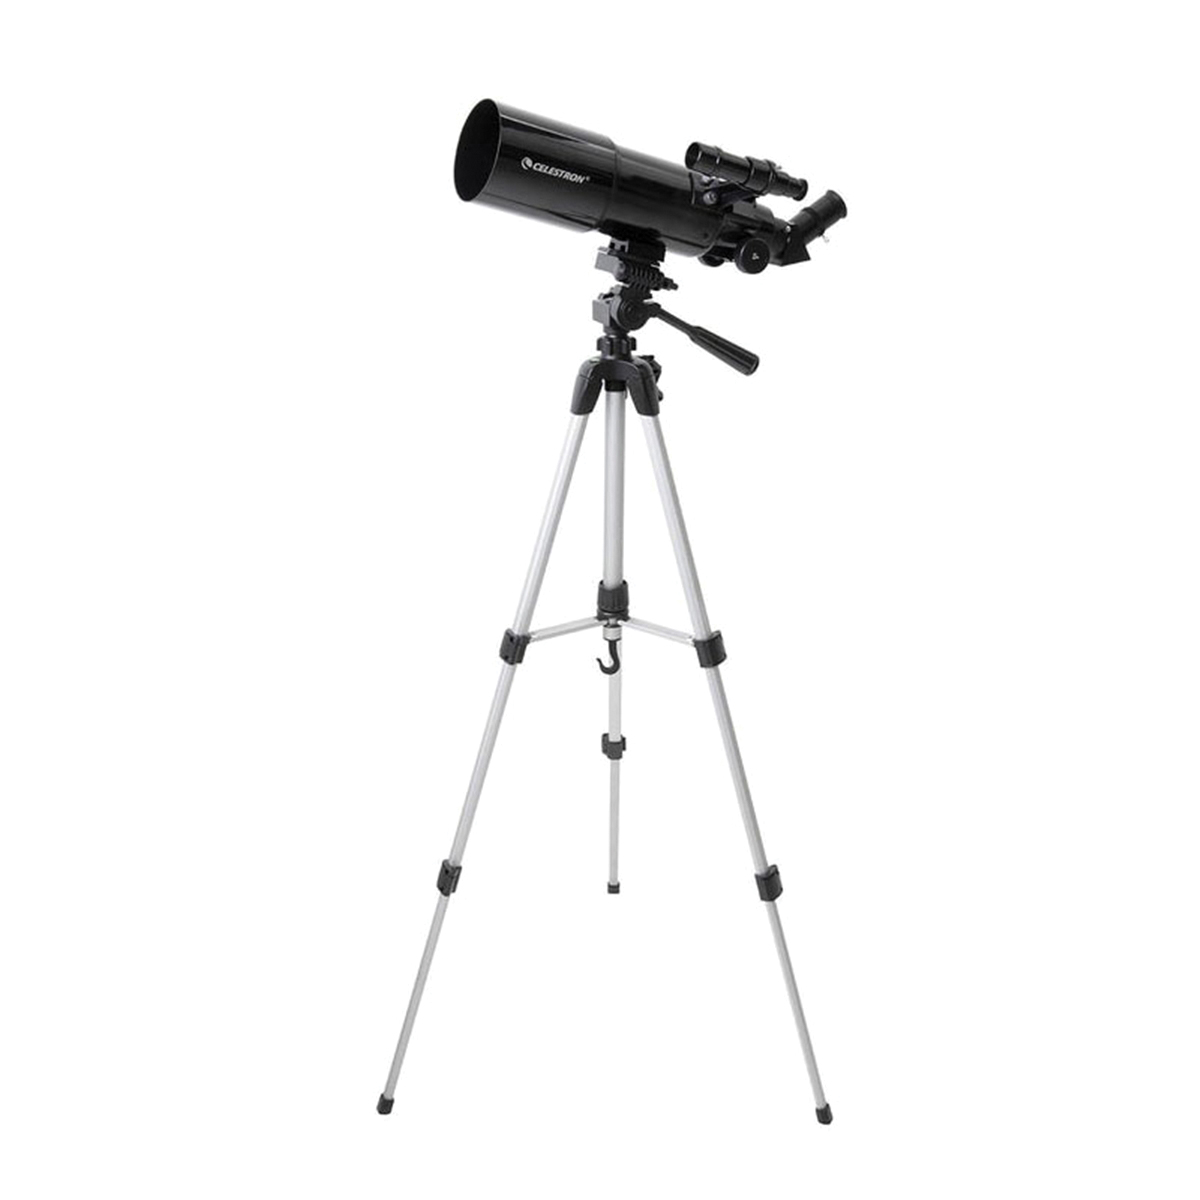 CELESTRON Travel Scope 80 Series 22030 Telescope with Smartphone Adapter, 3.1 in Aperture, 15.74 in L Focal - 5